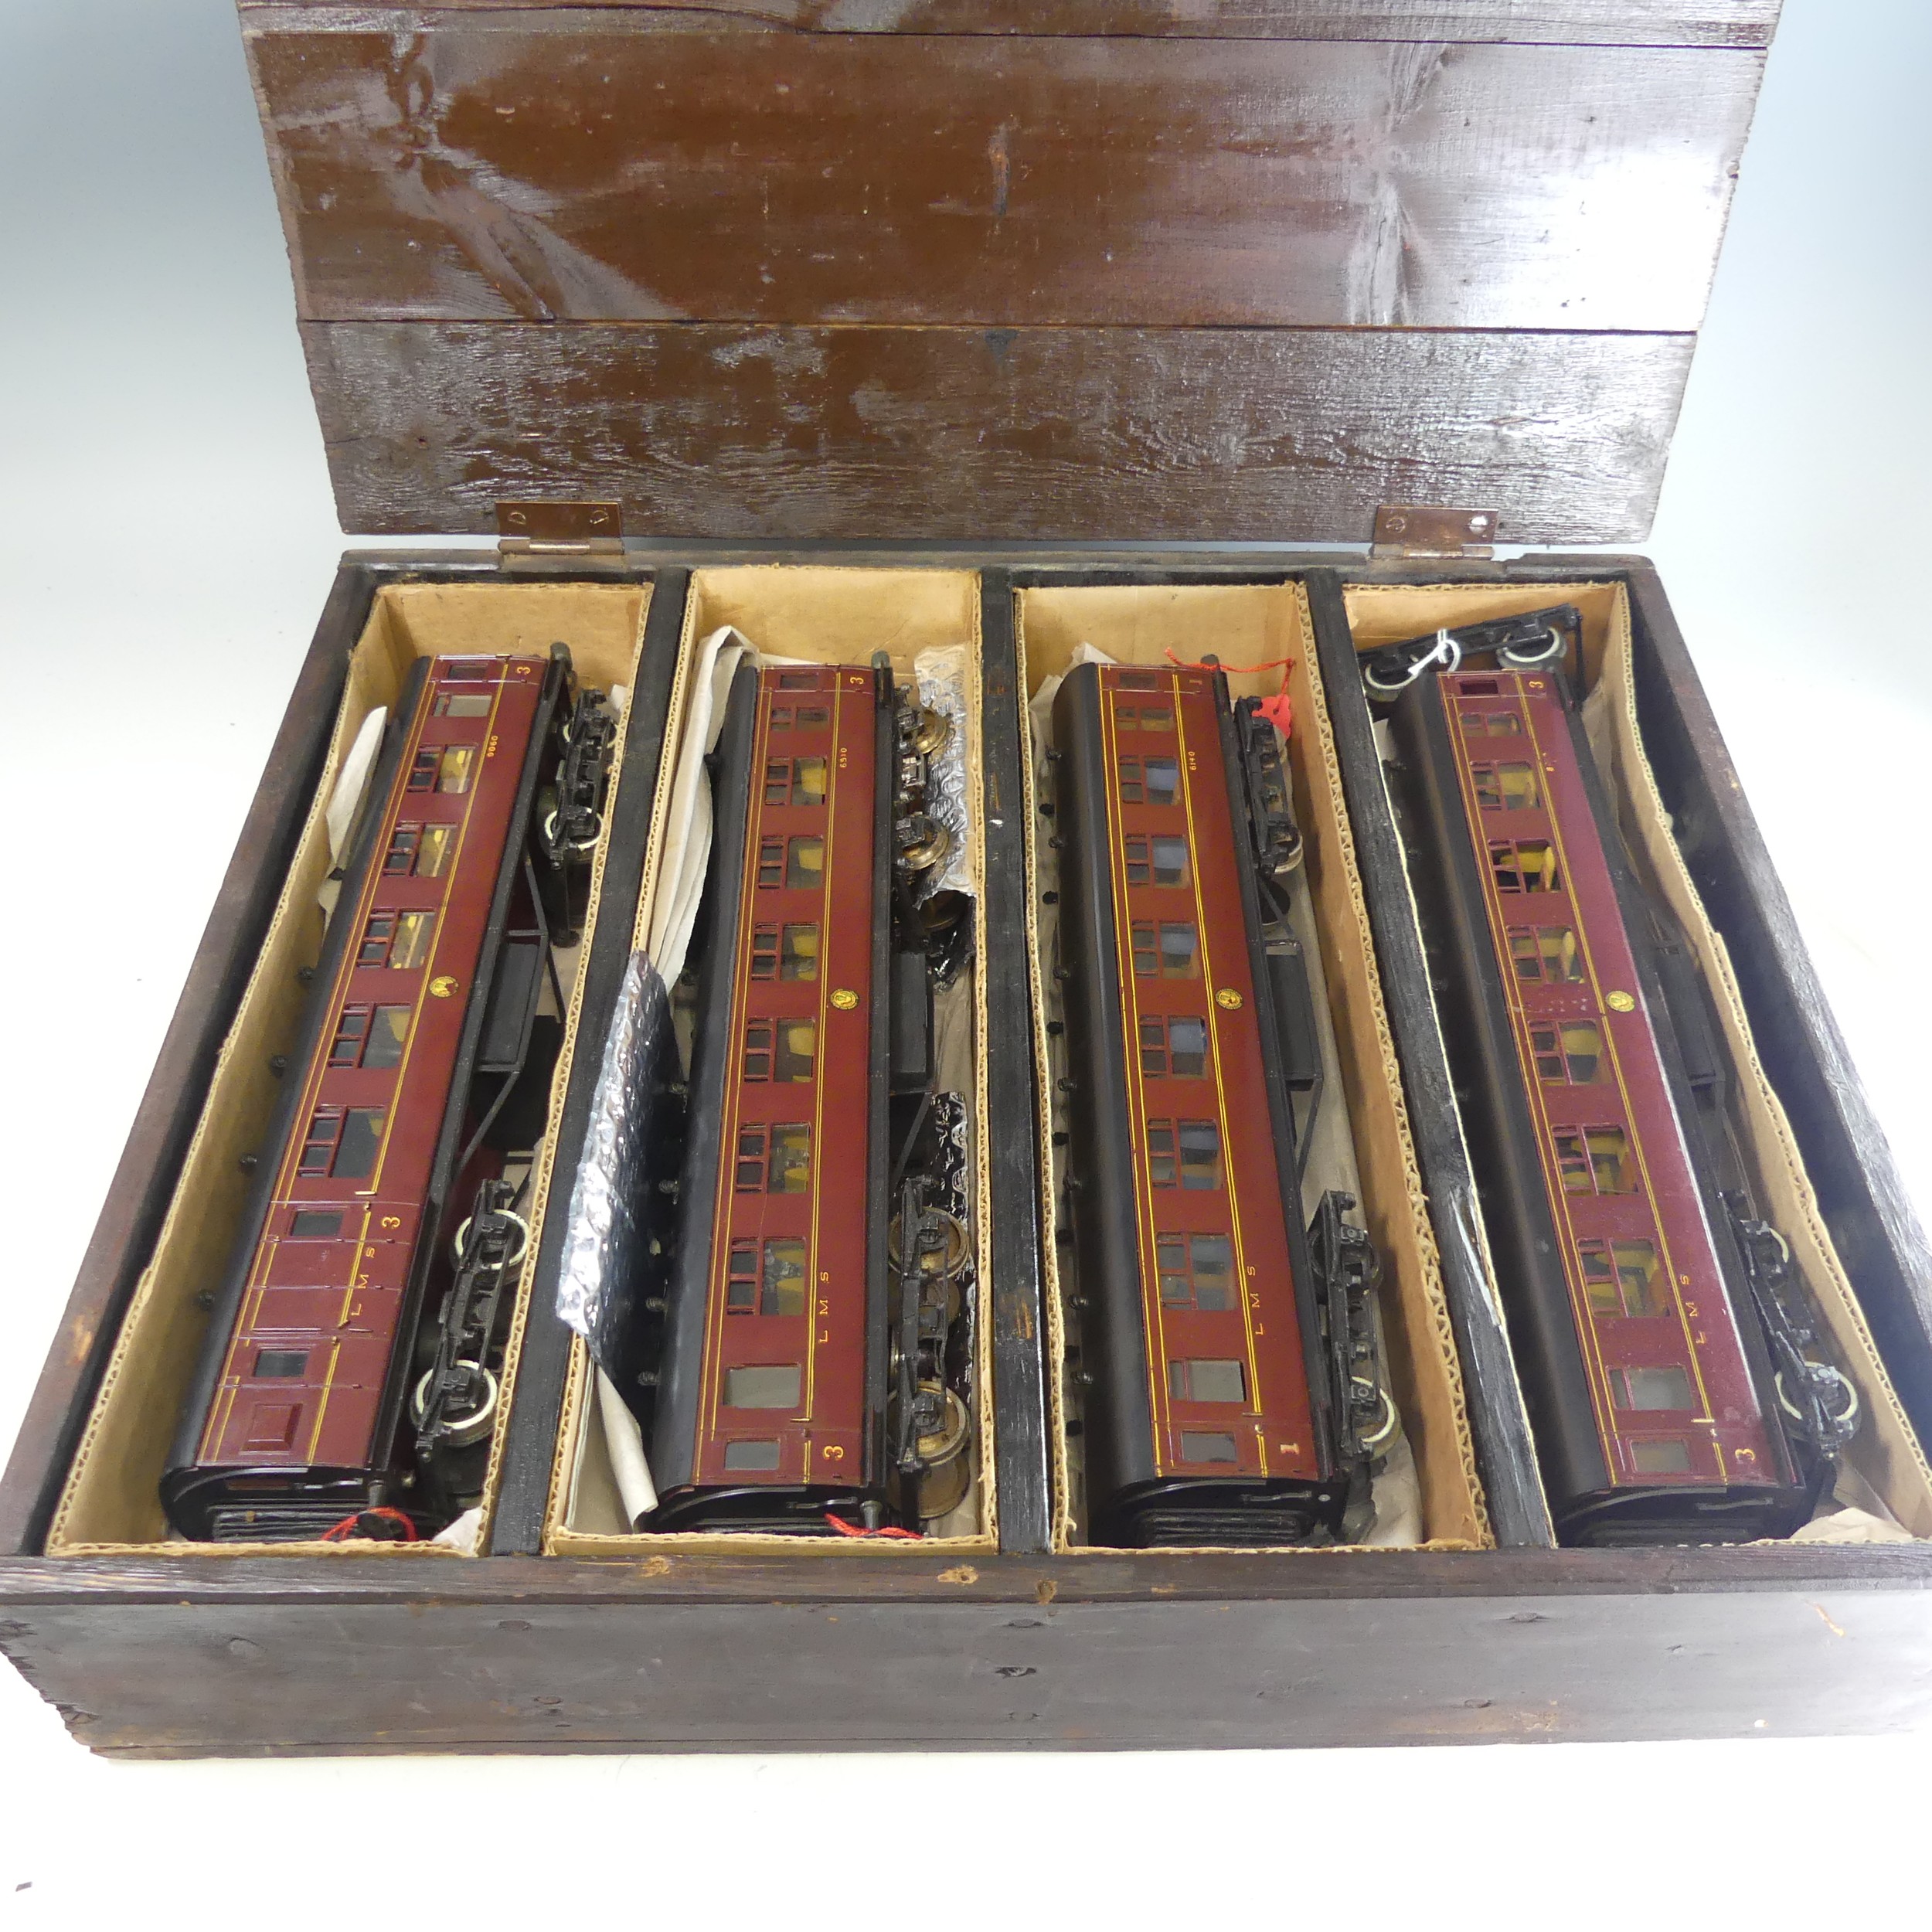 Four Leeds Model Co. ‘0’ gauge LMS bogie Passenger Coaches, maroon with yellow lettering, comprising